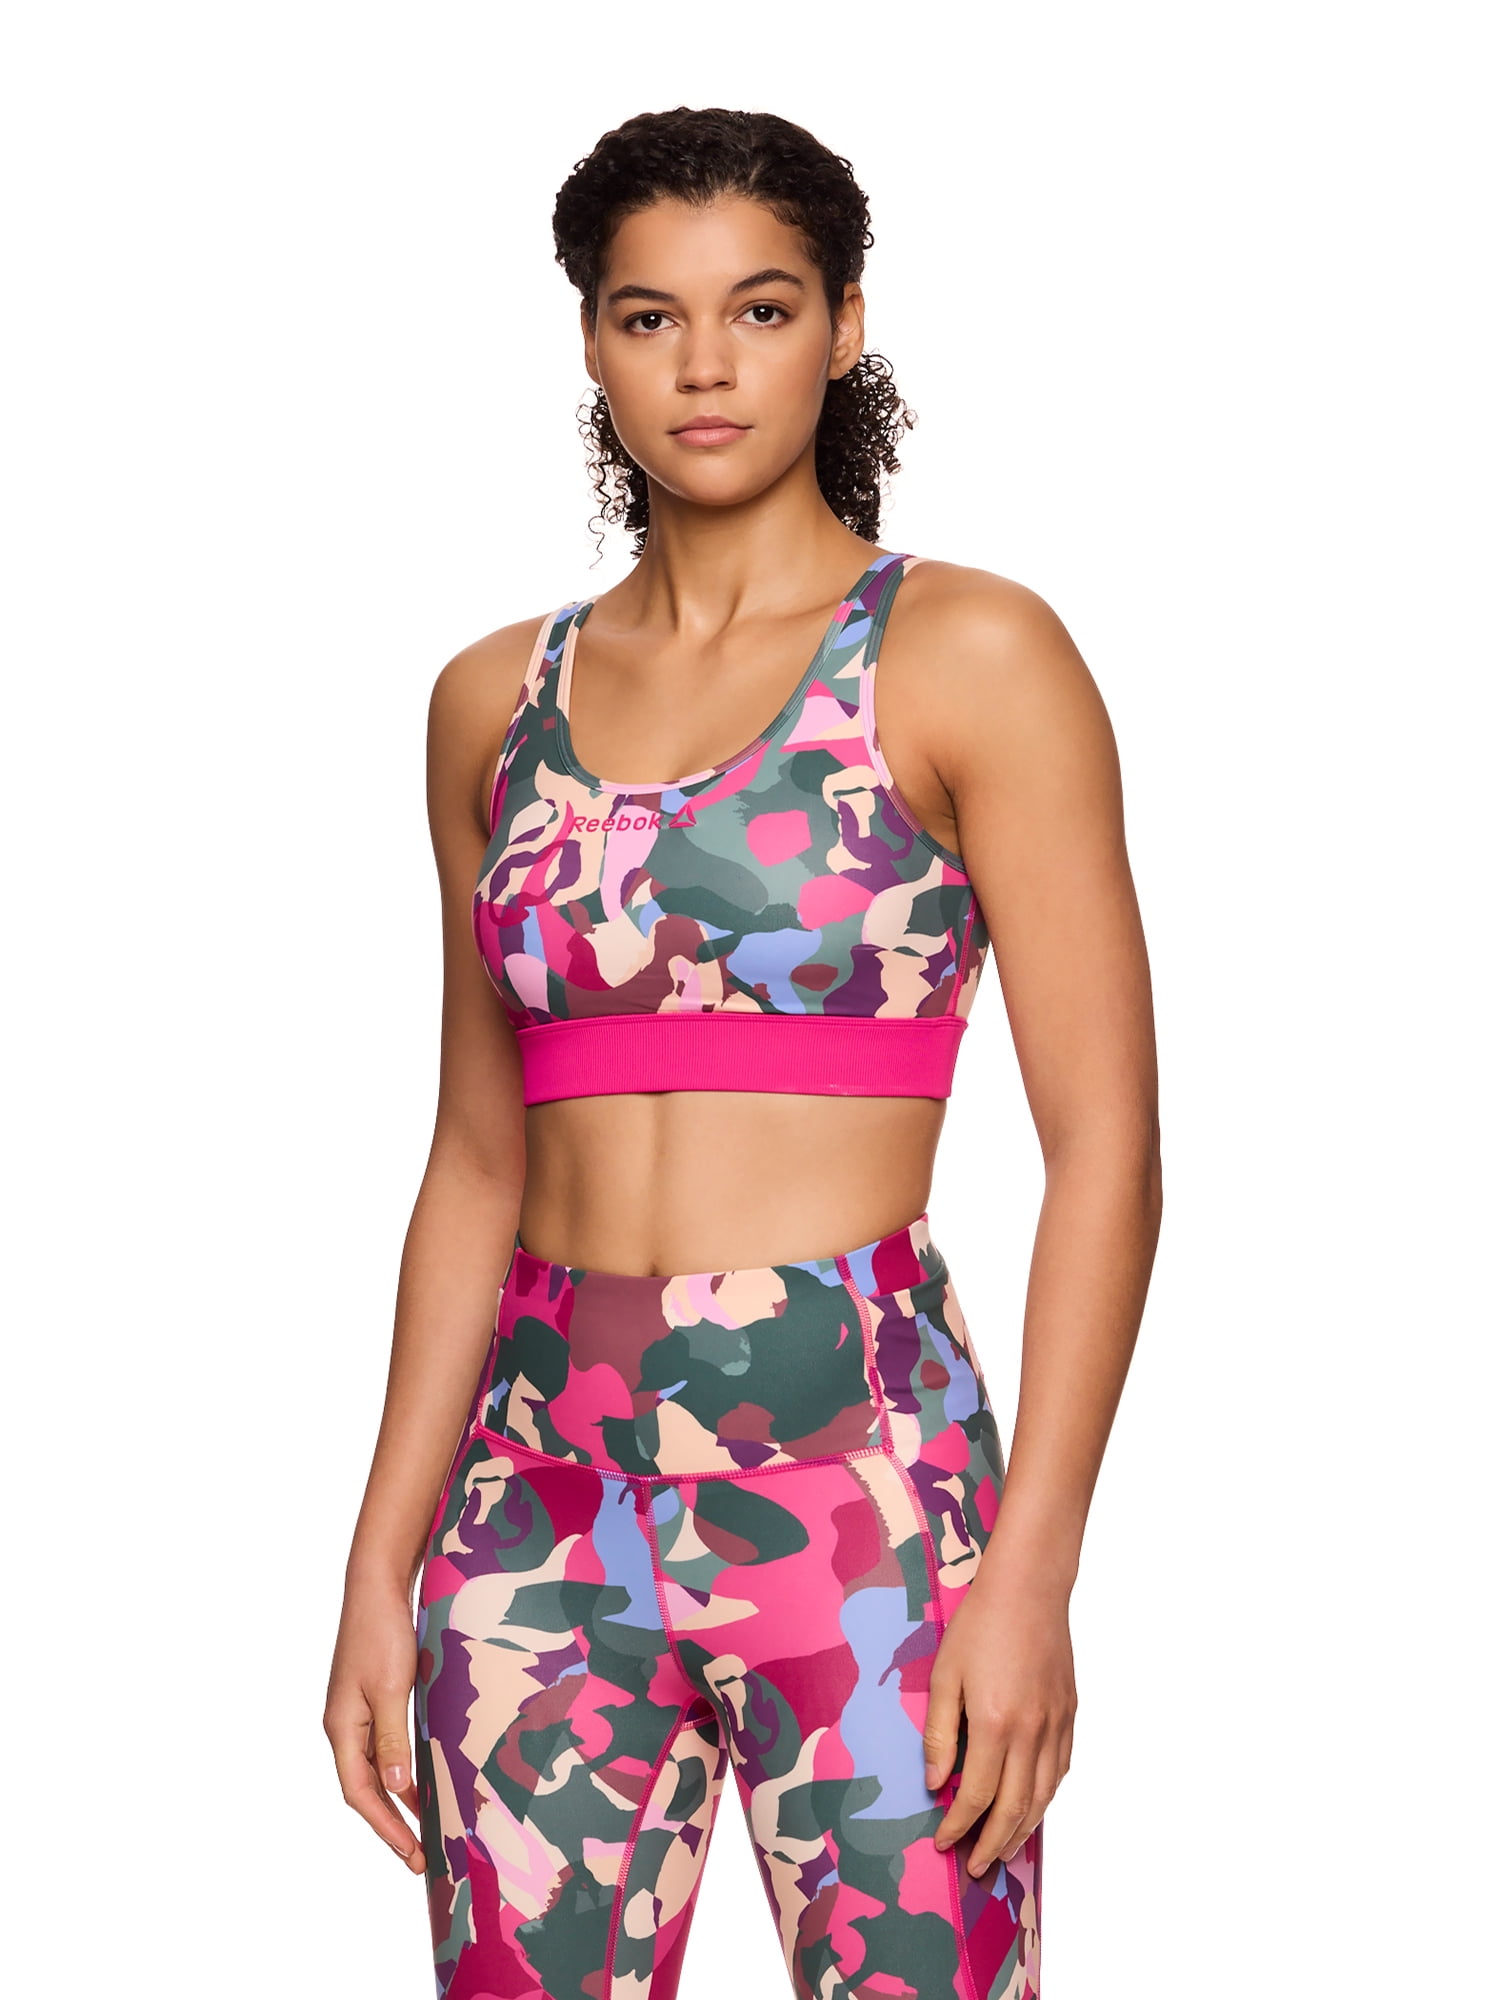 Buy MUBBA Sports Bra for Girls and Women Daily use Bra Combo Pack